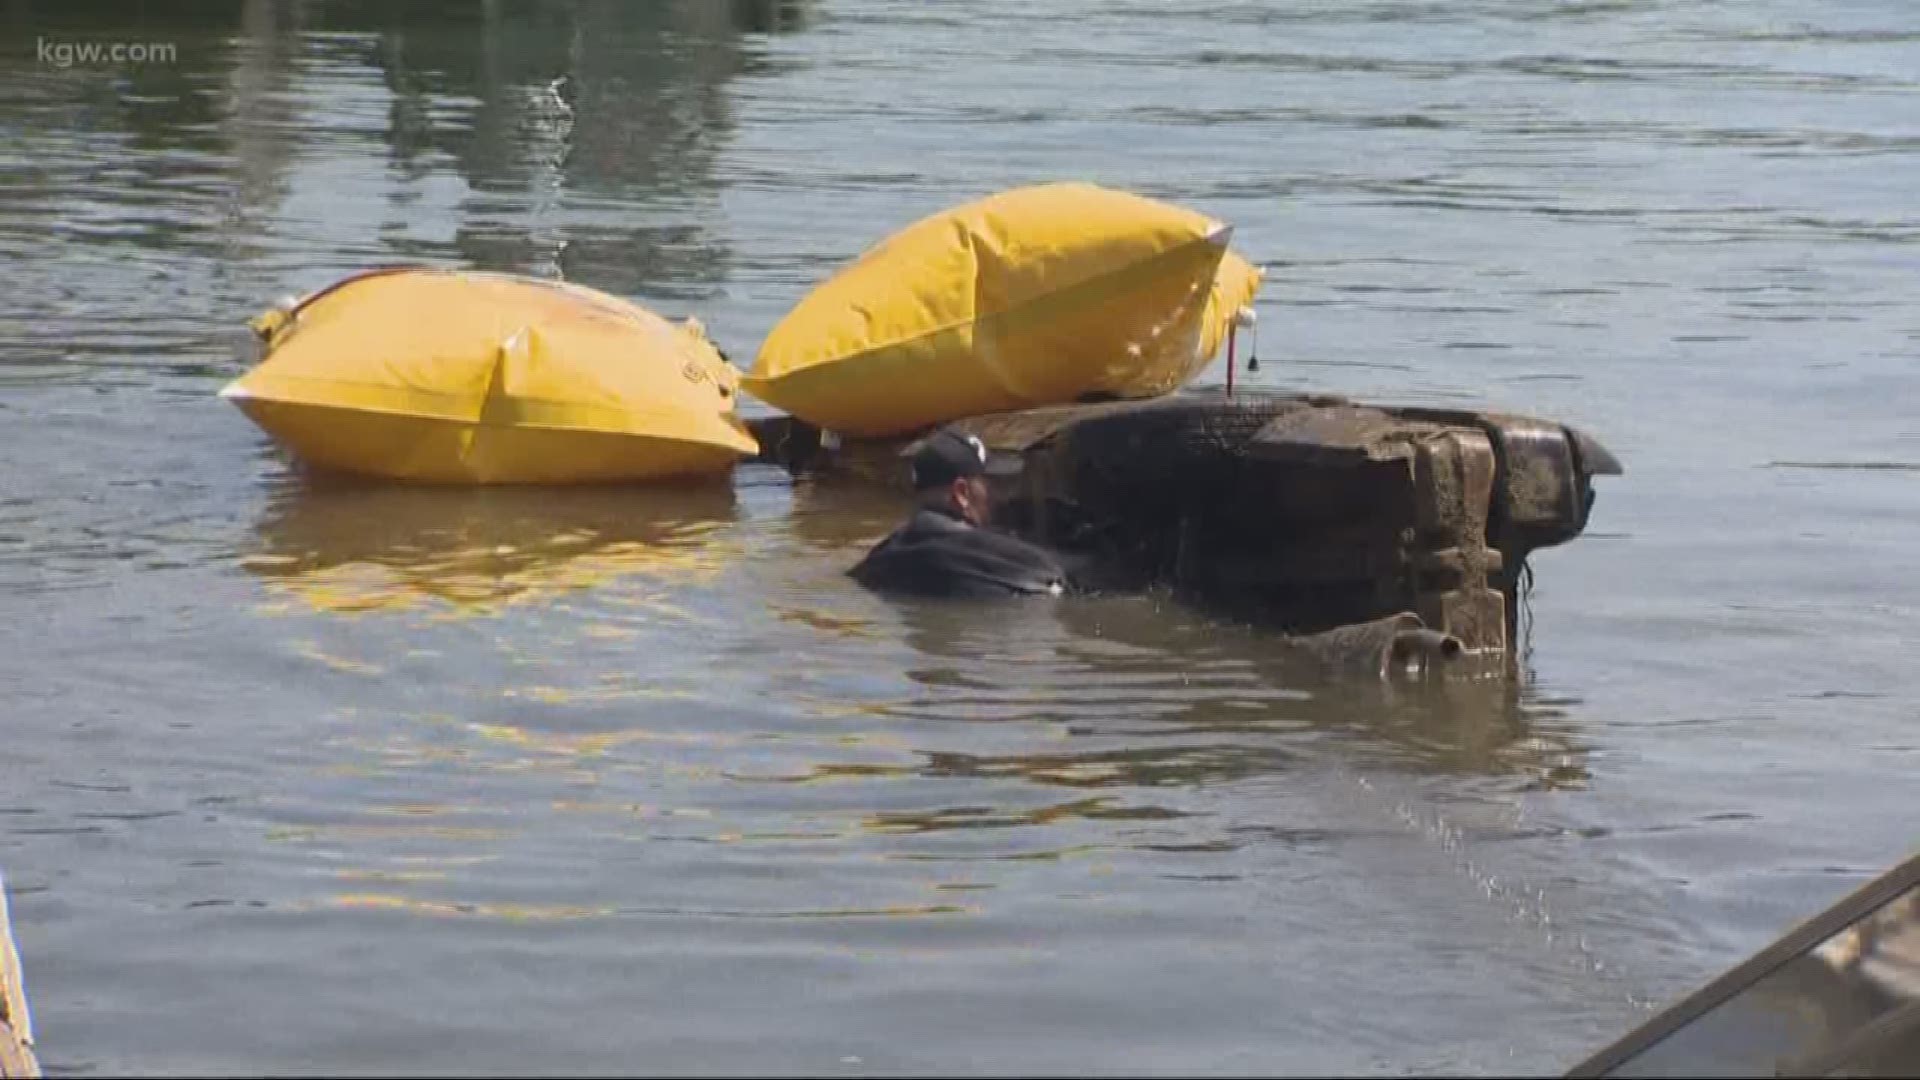 One big job. Volunteers pulled six cars from the Willamette River.